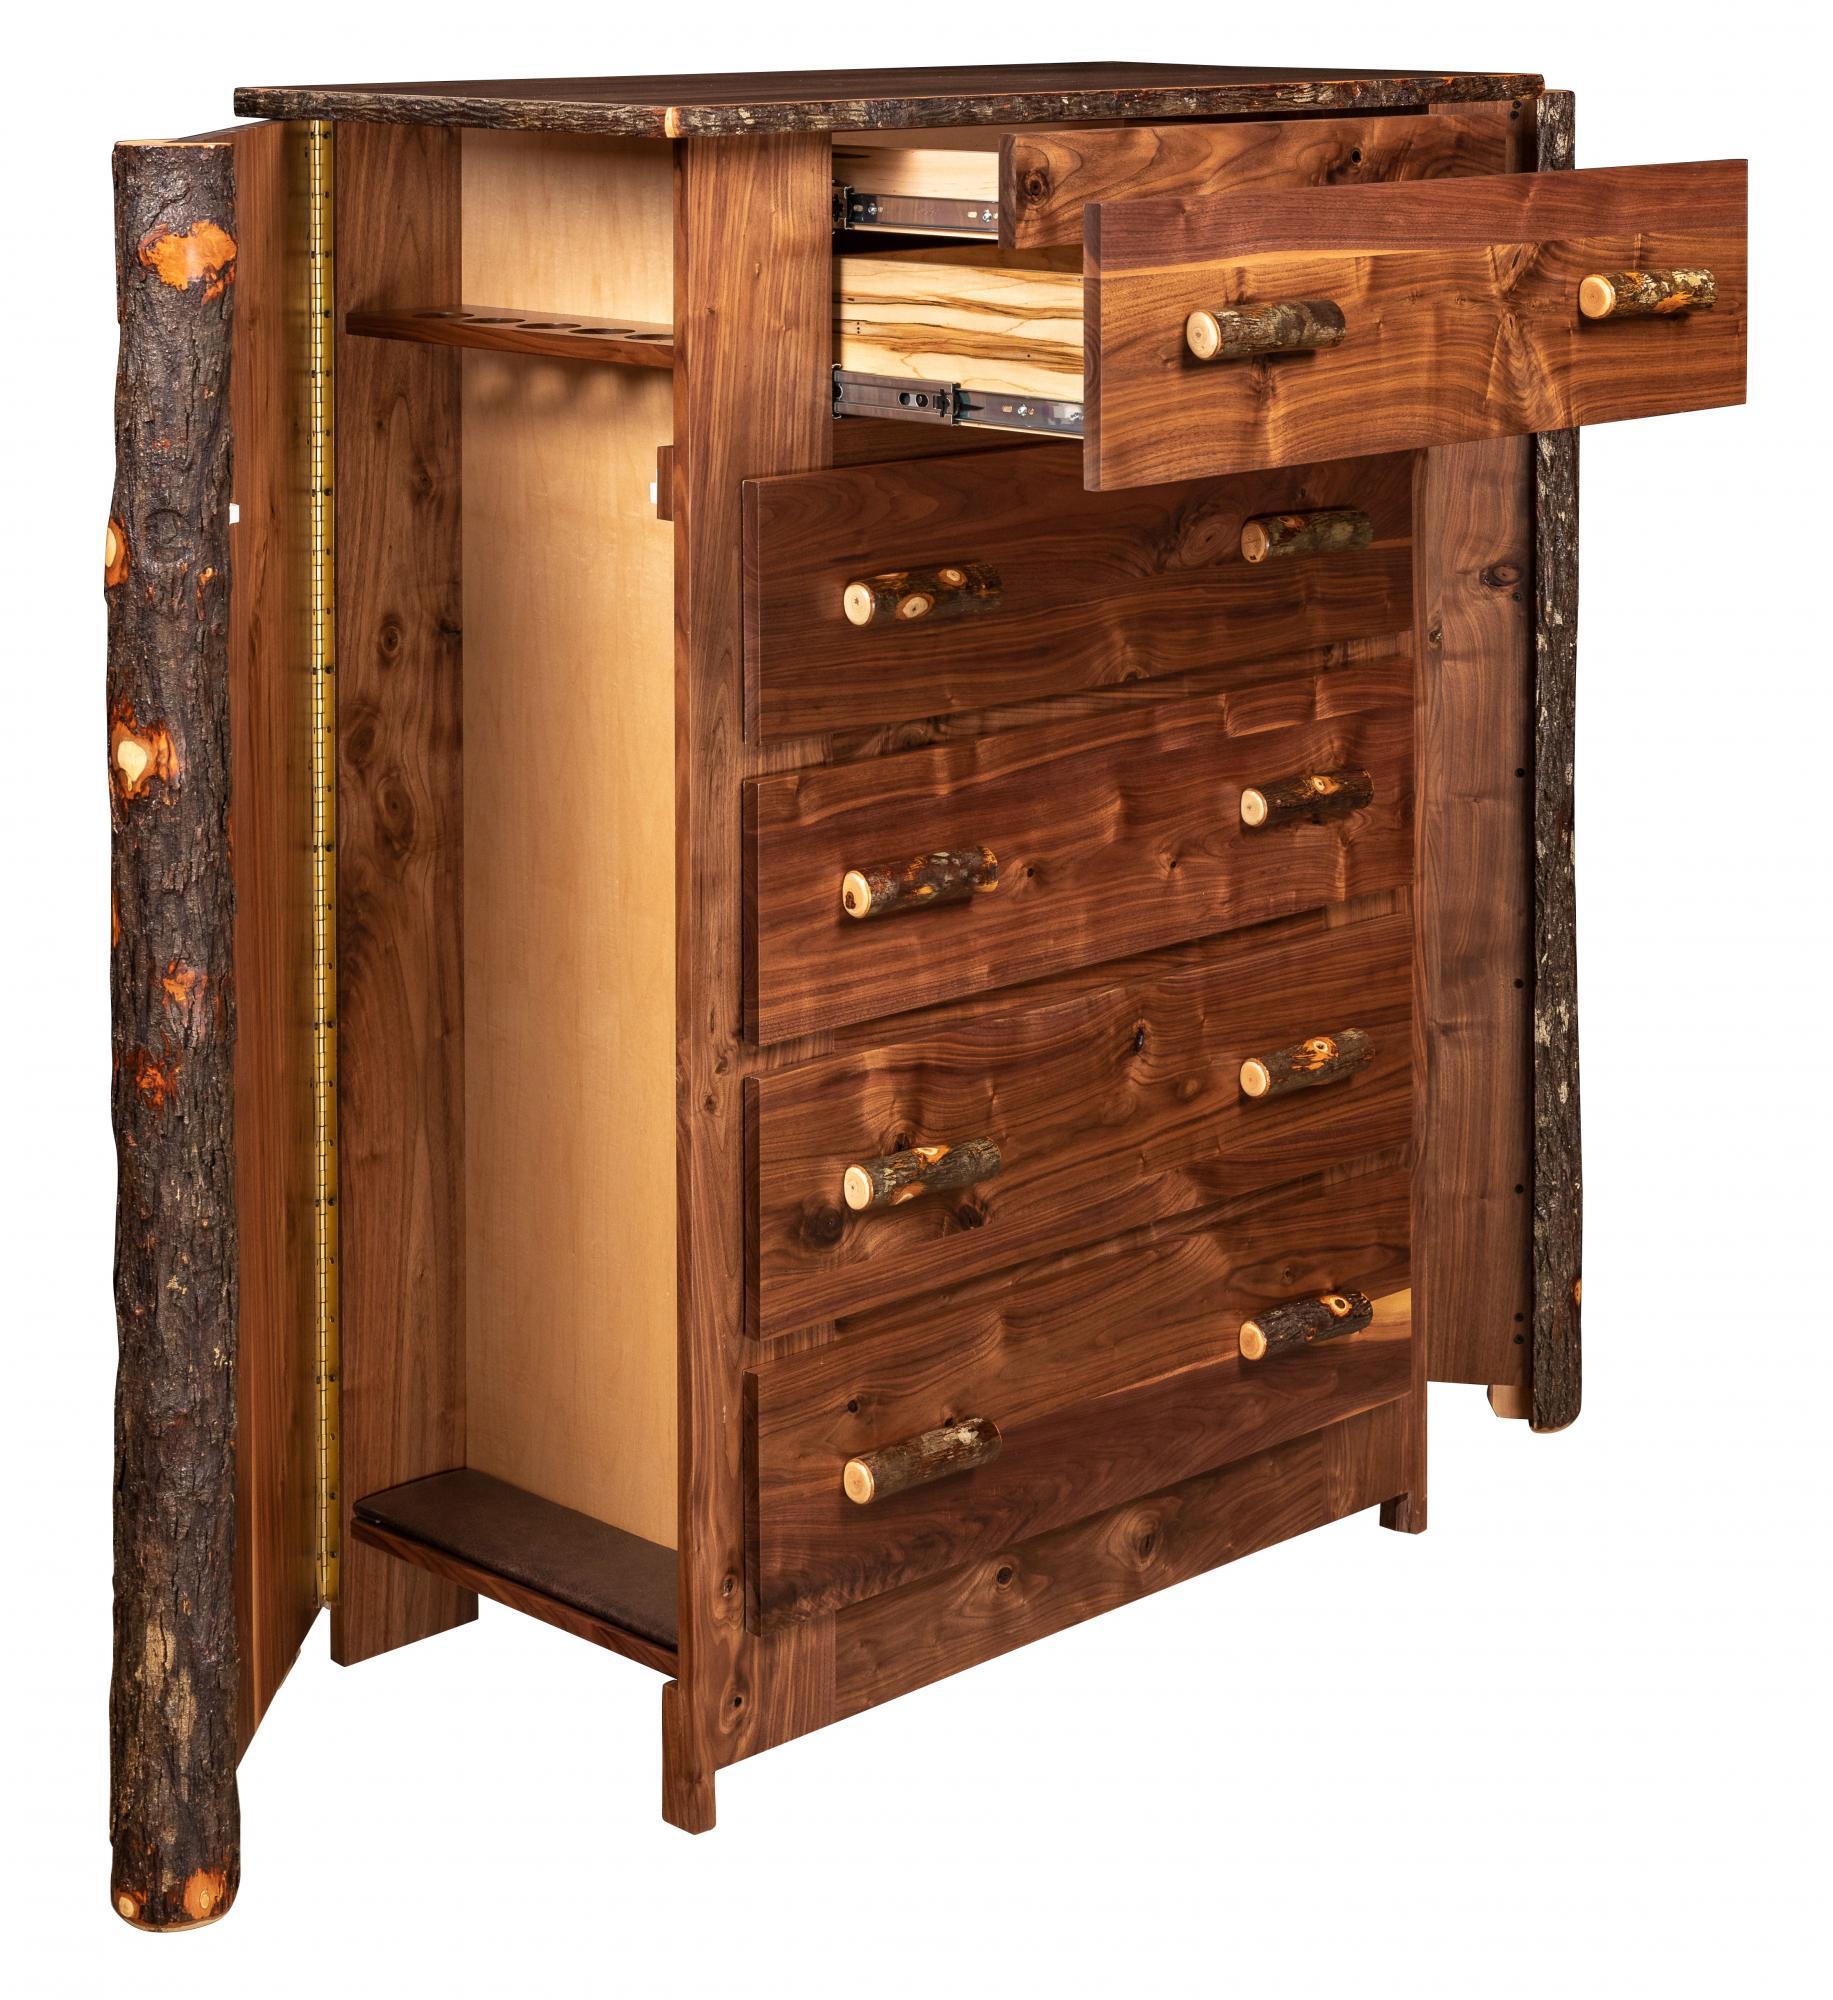 https://coveredbridgefurniture.com/sites/default/files/styles/max-width-height_2000/public/product-images/1648%20Hickory%20Sportsmen%20Chest%20All%20Open.jpg?itok=2dpQLQyC